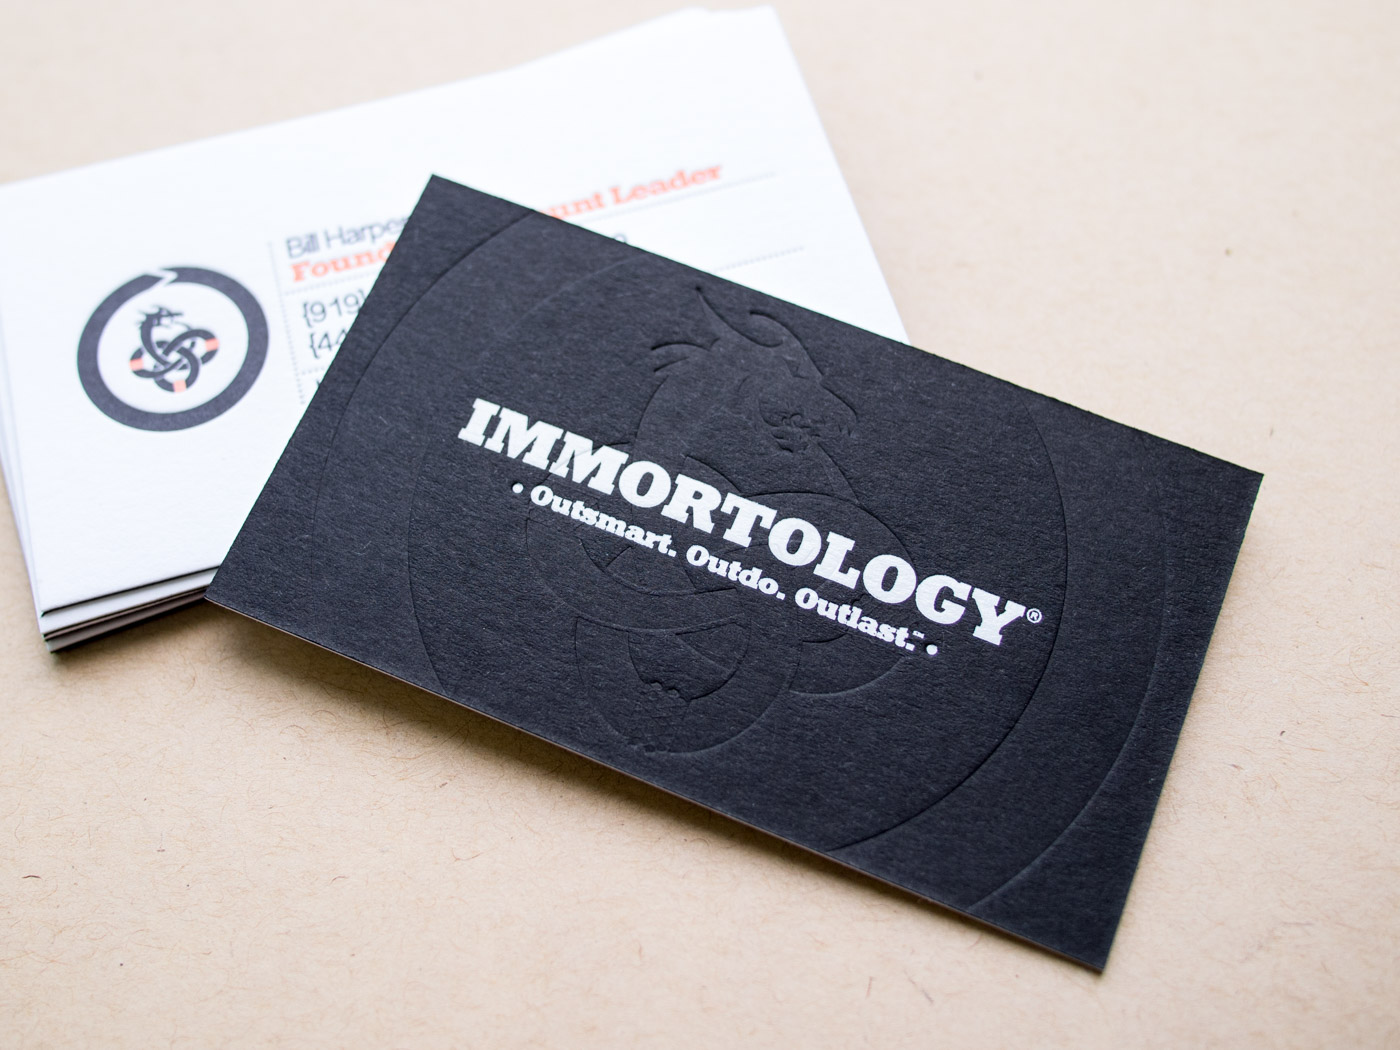 Immortology | Printed by Parklife Press